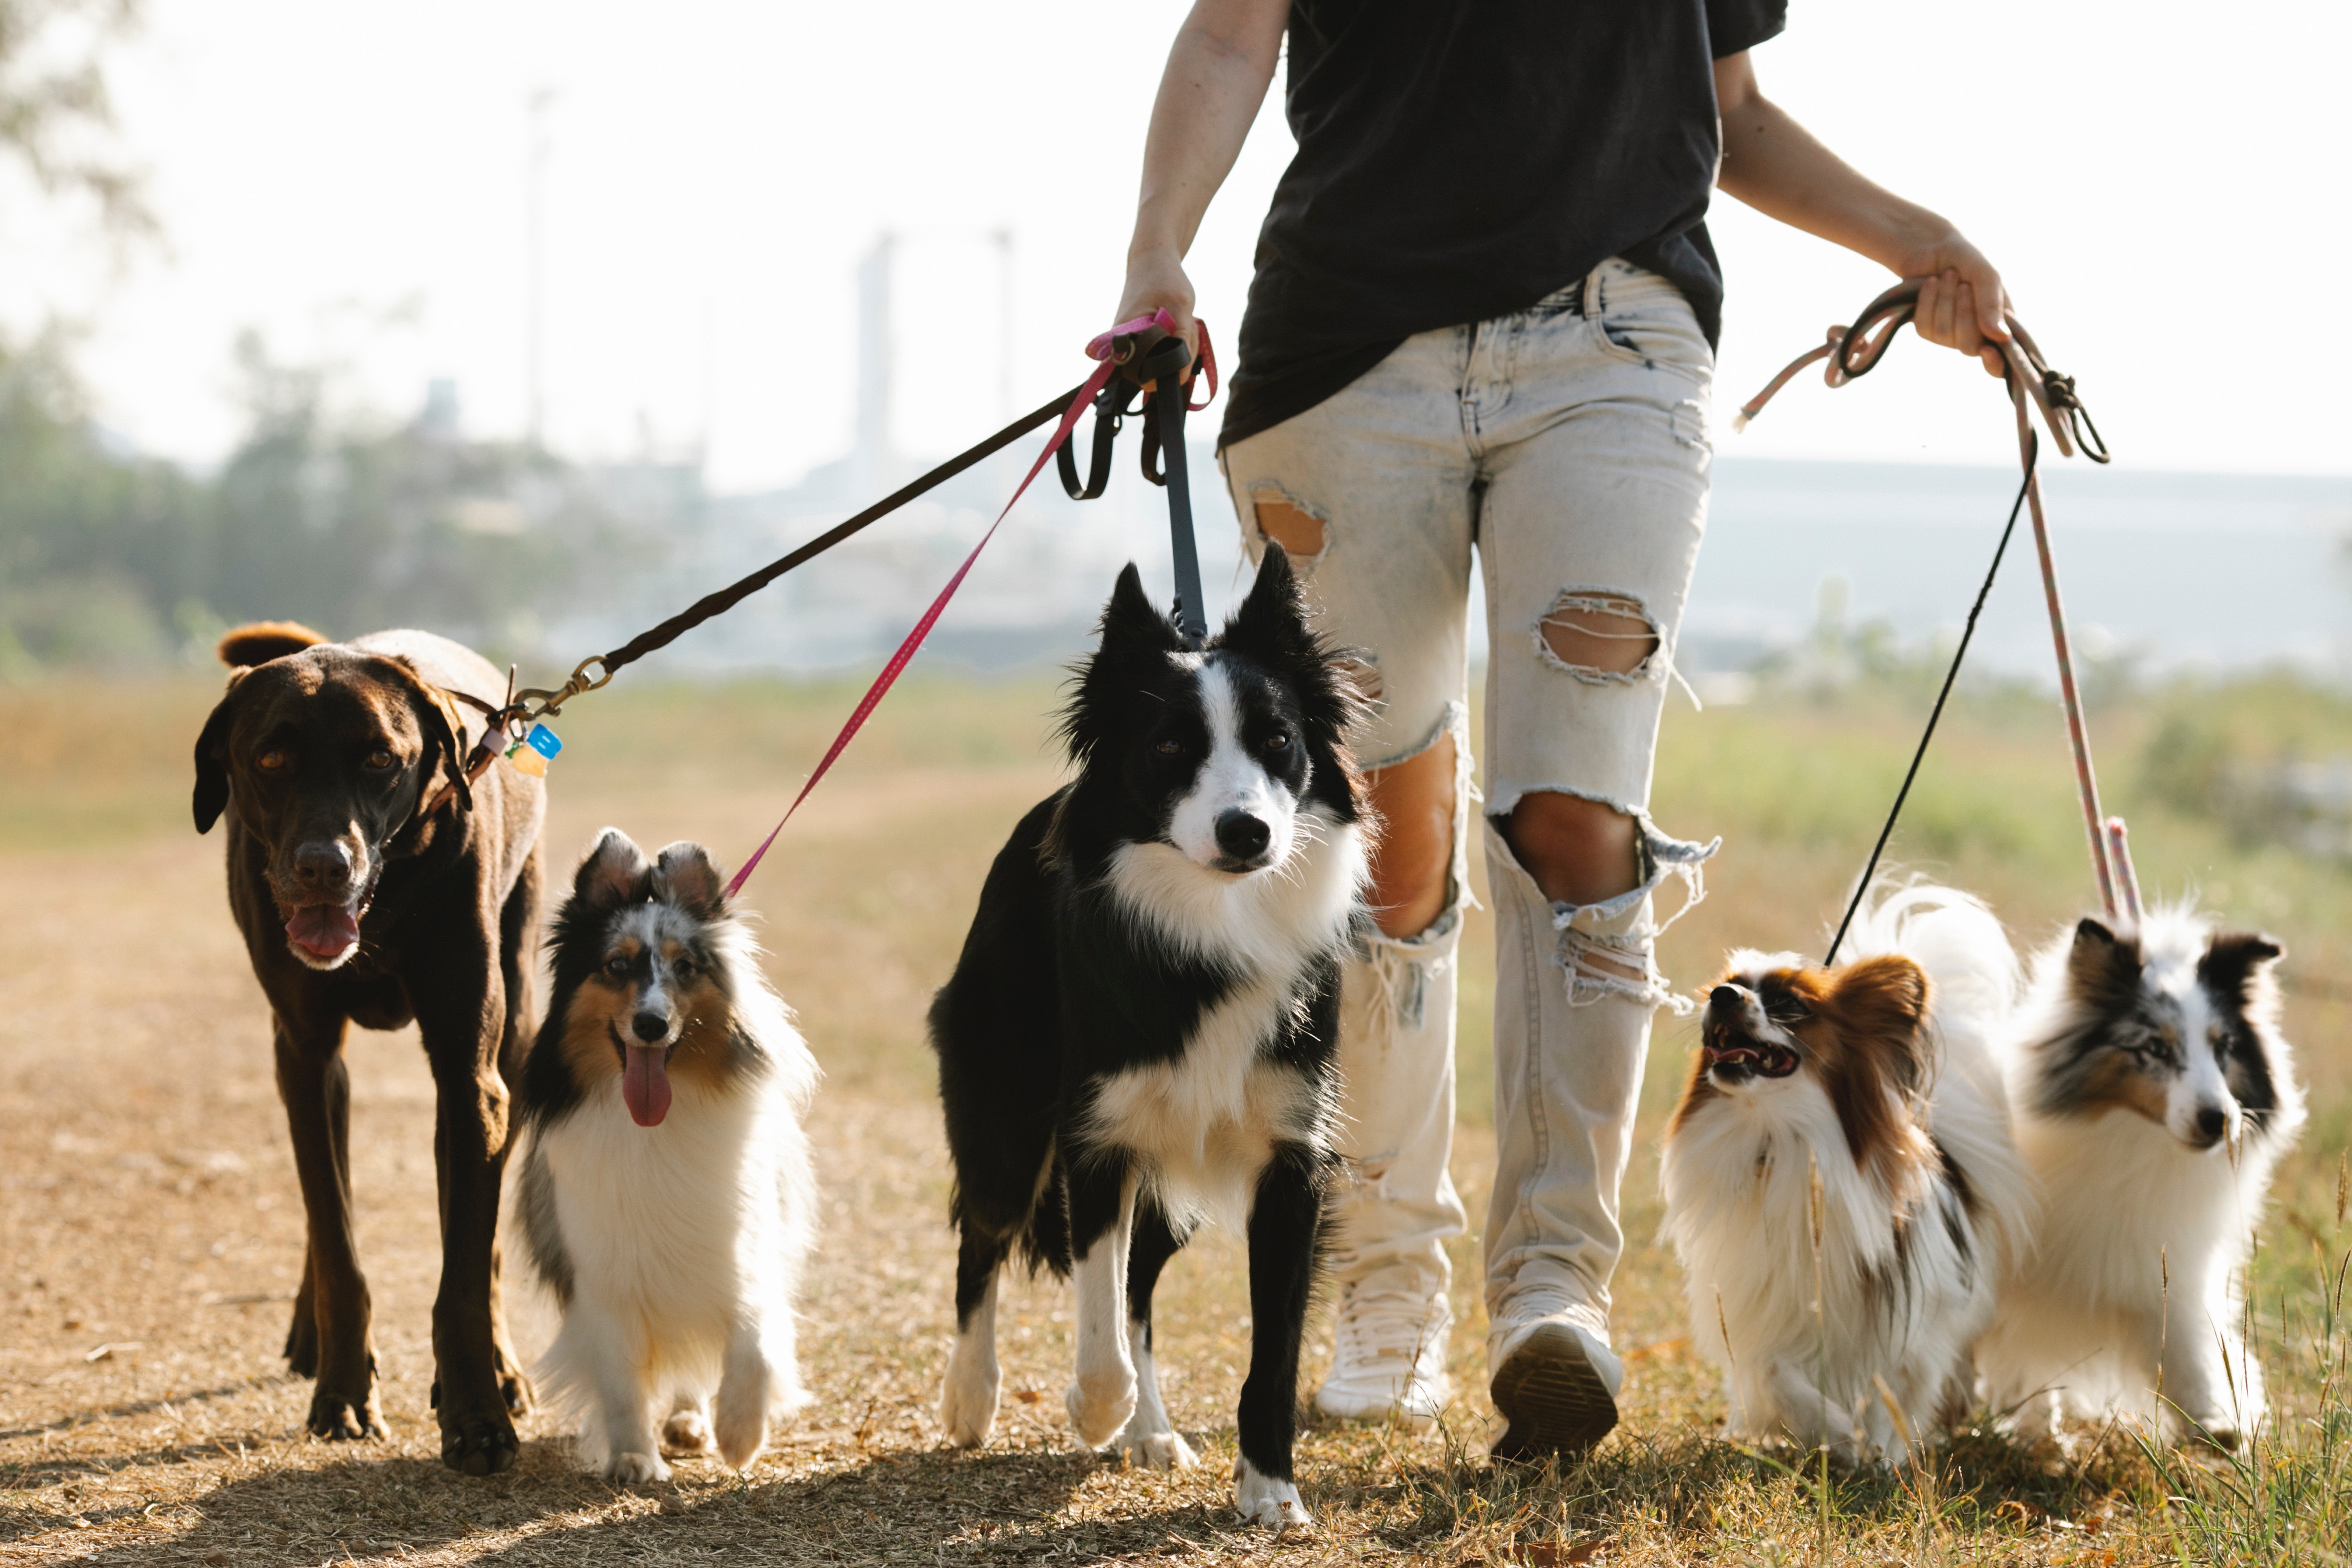 An individual walking a bunch of dogs │ Source: Pexels